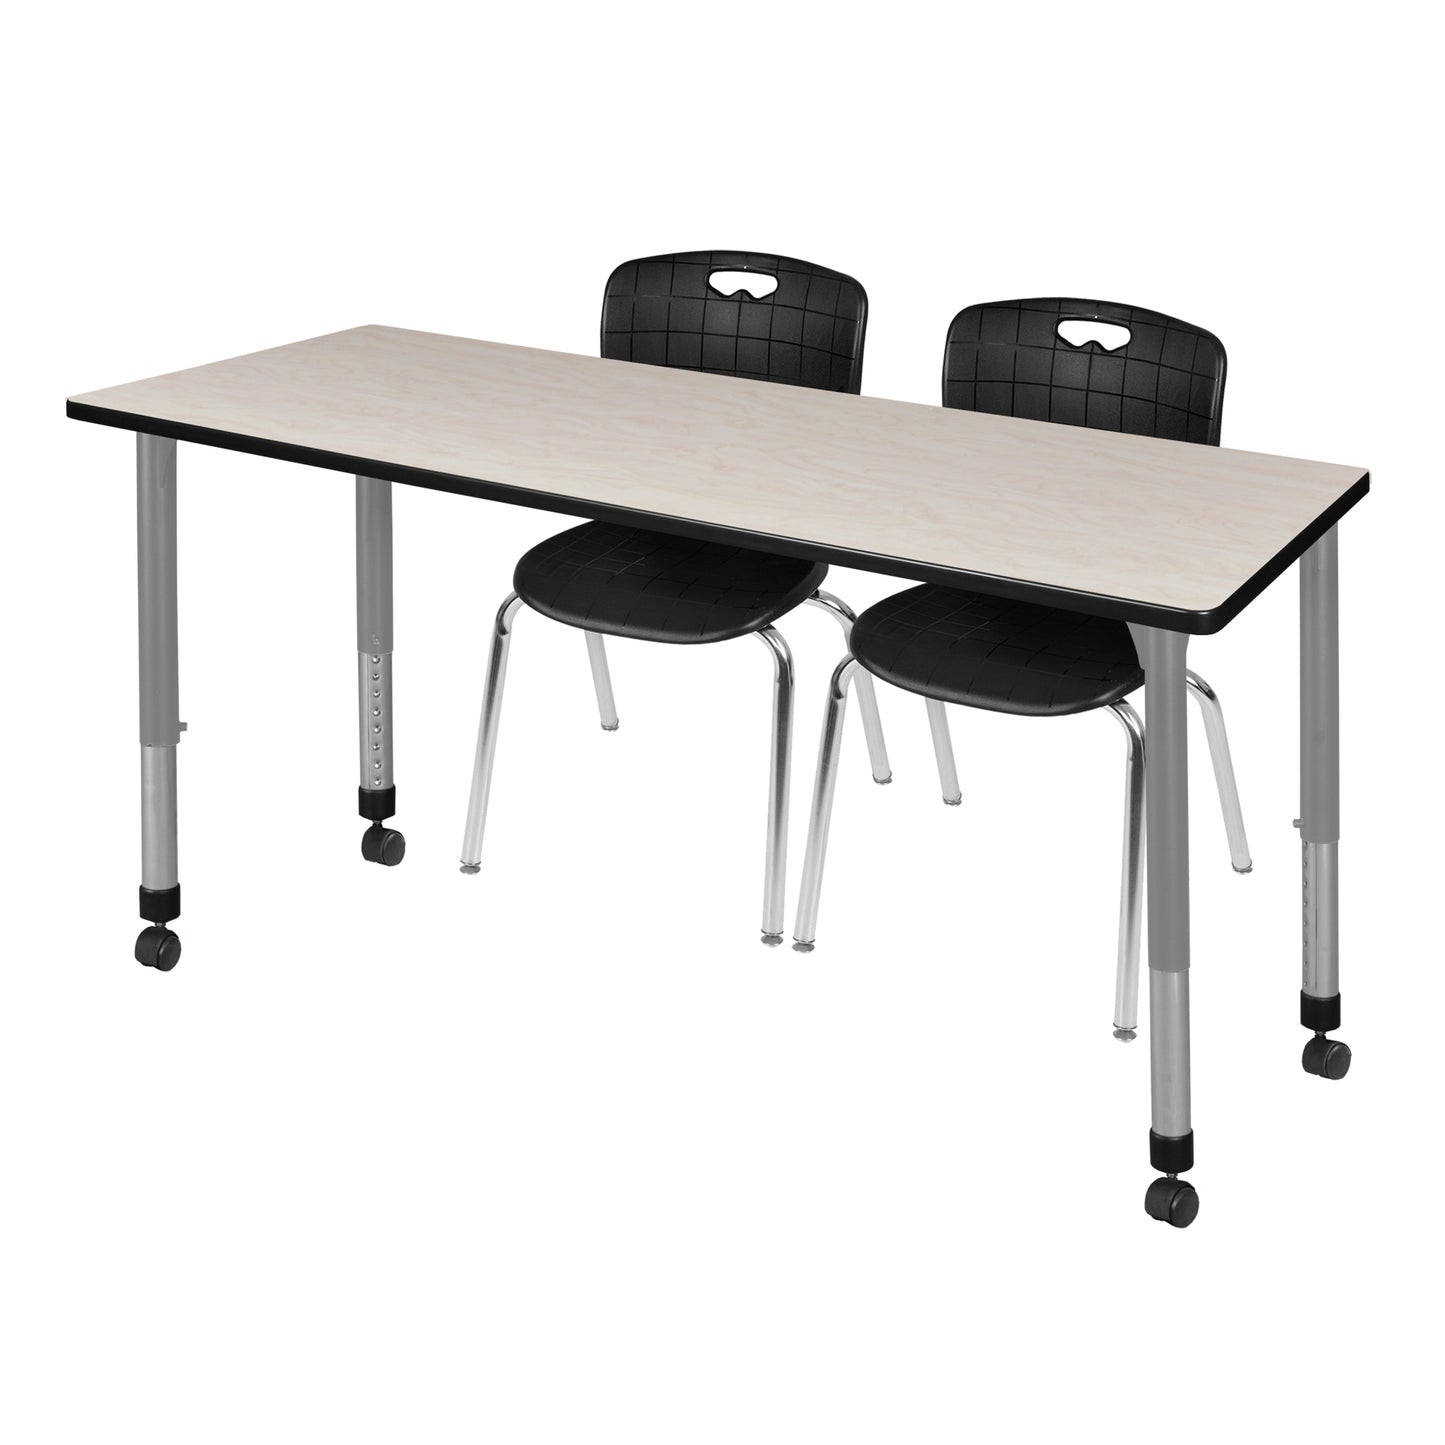 Regency Kee 72 x 30 in. Adjustable Classroom Table & 2 Andy 18 in. Stack Chairs